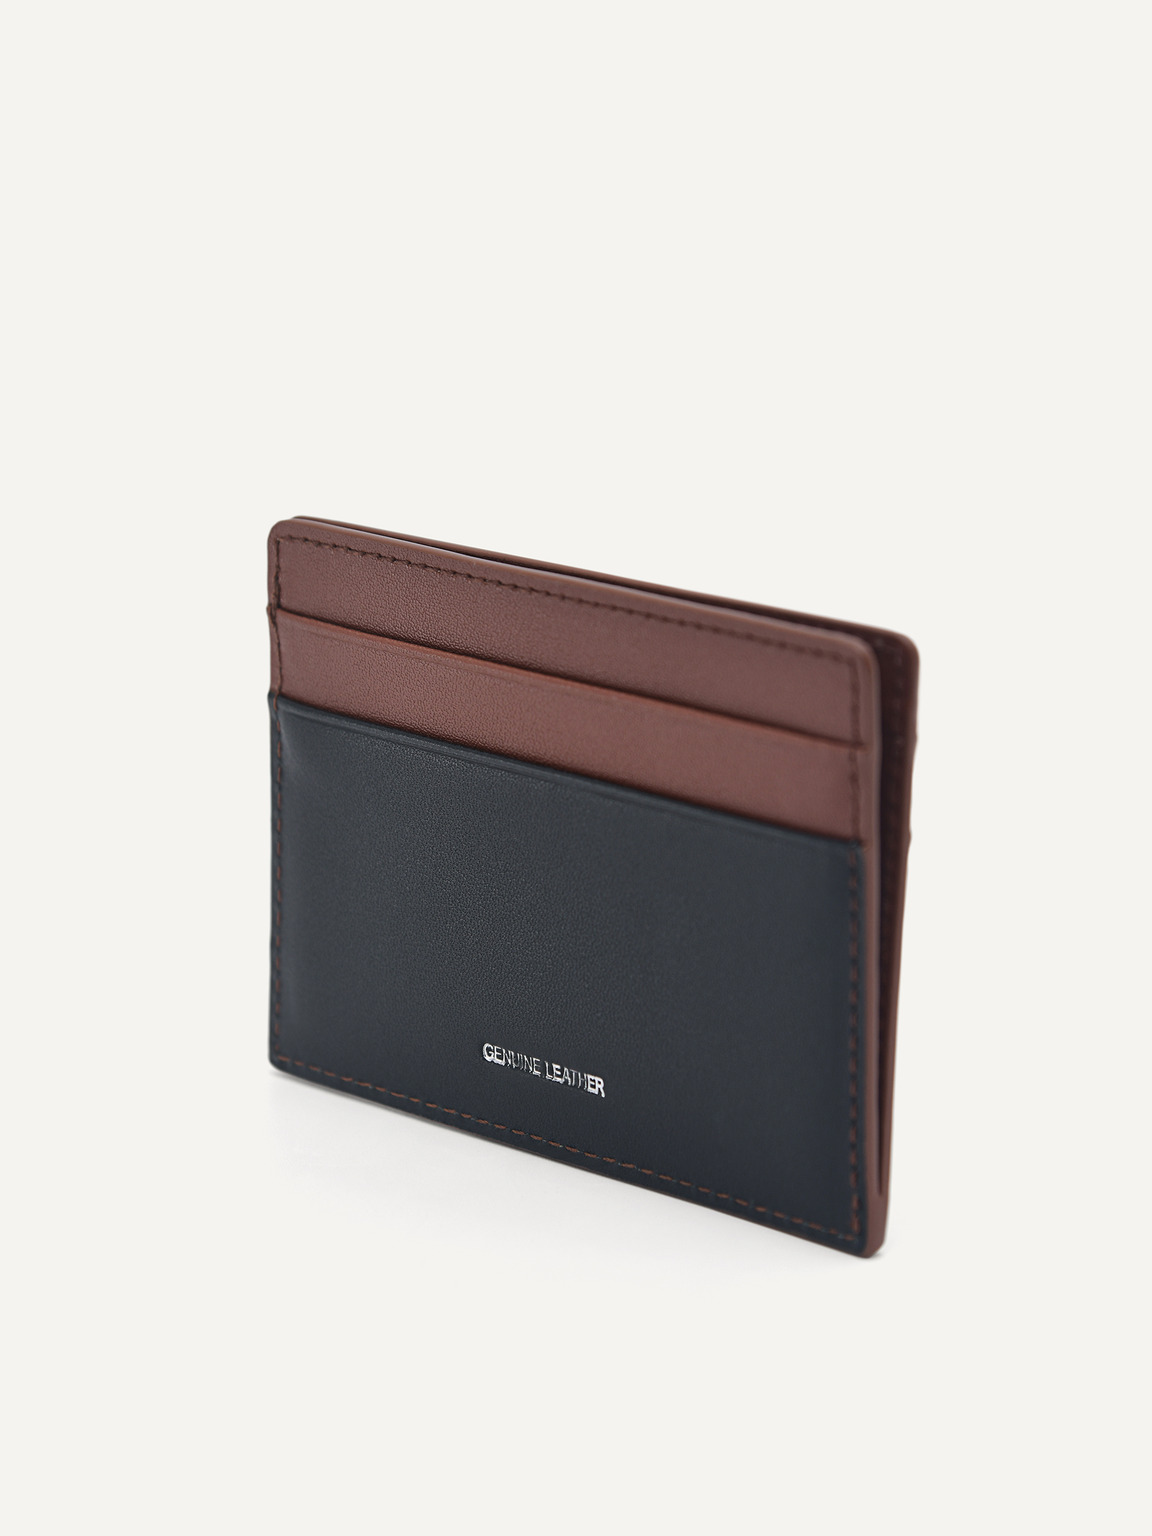 Leather Flat Card Holder, Brown